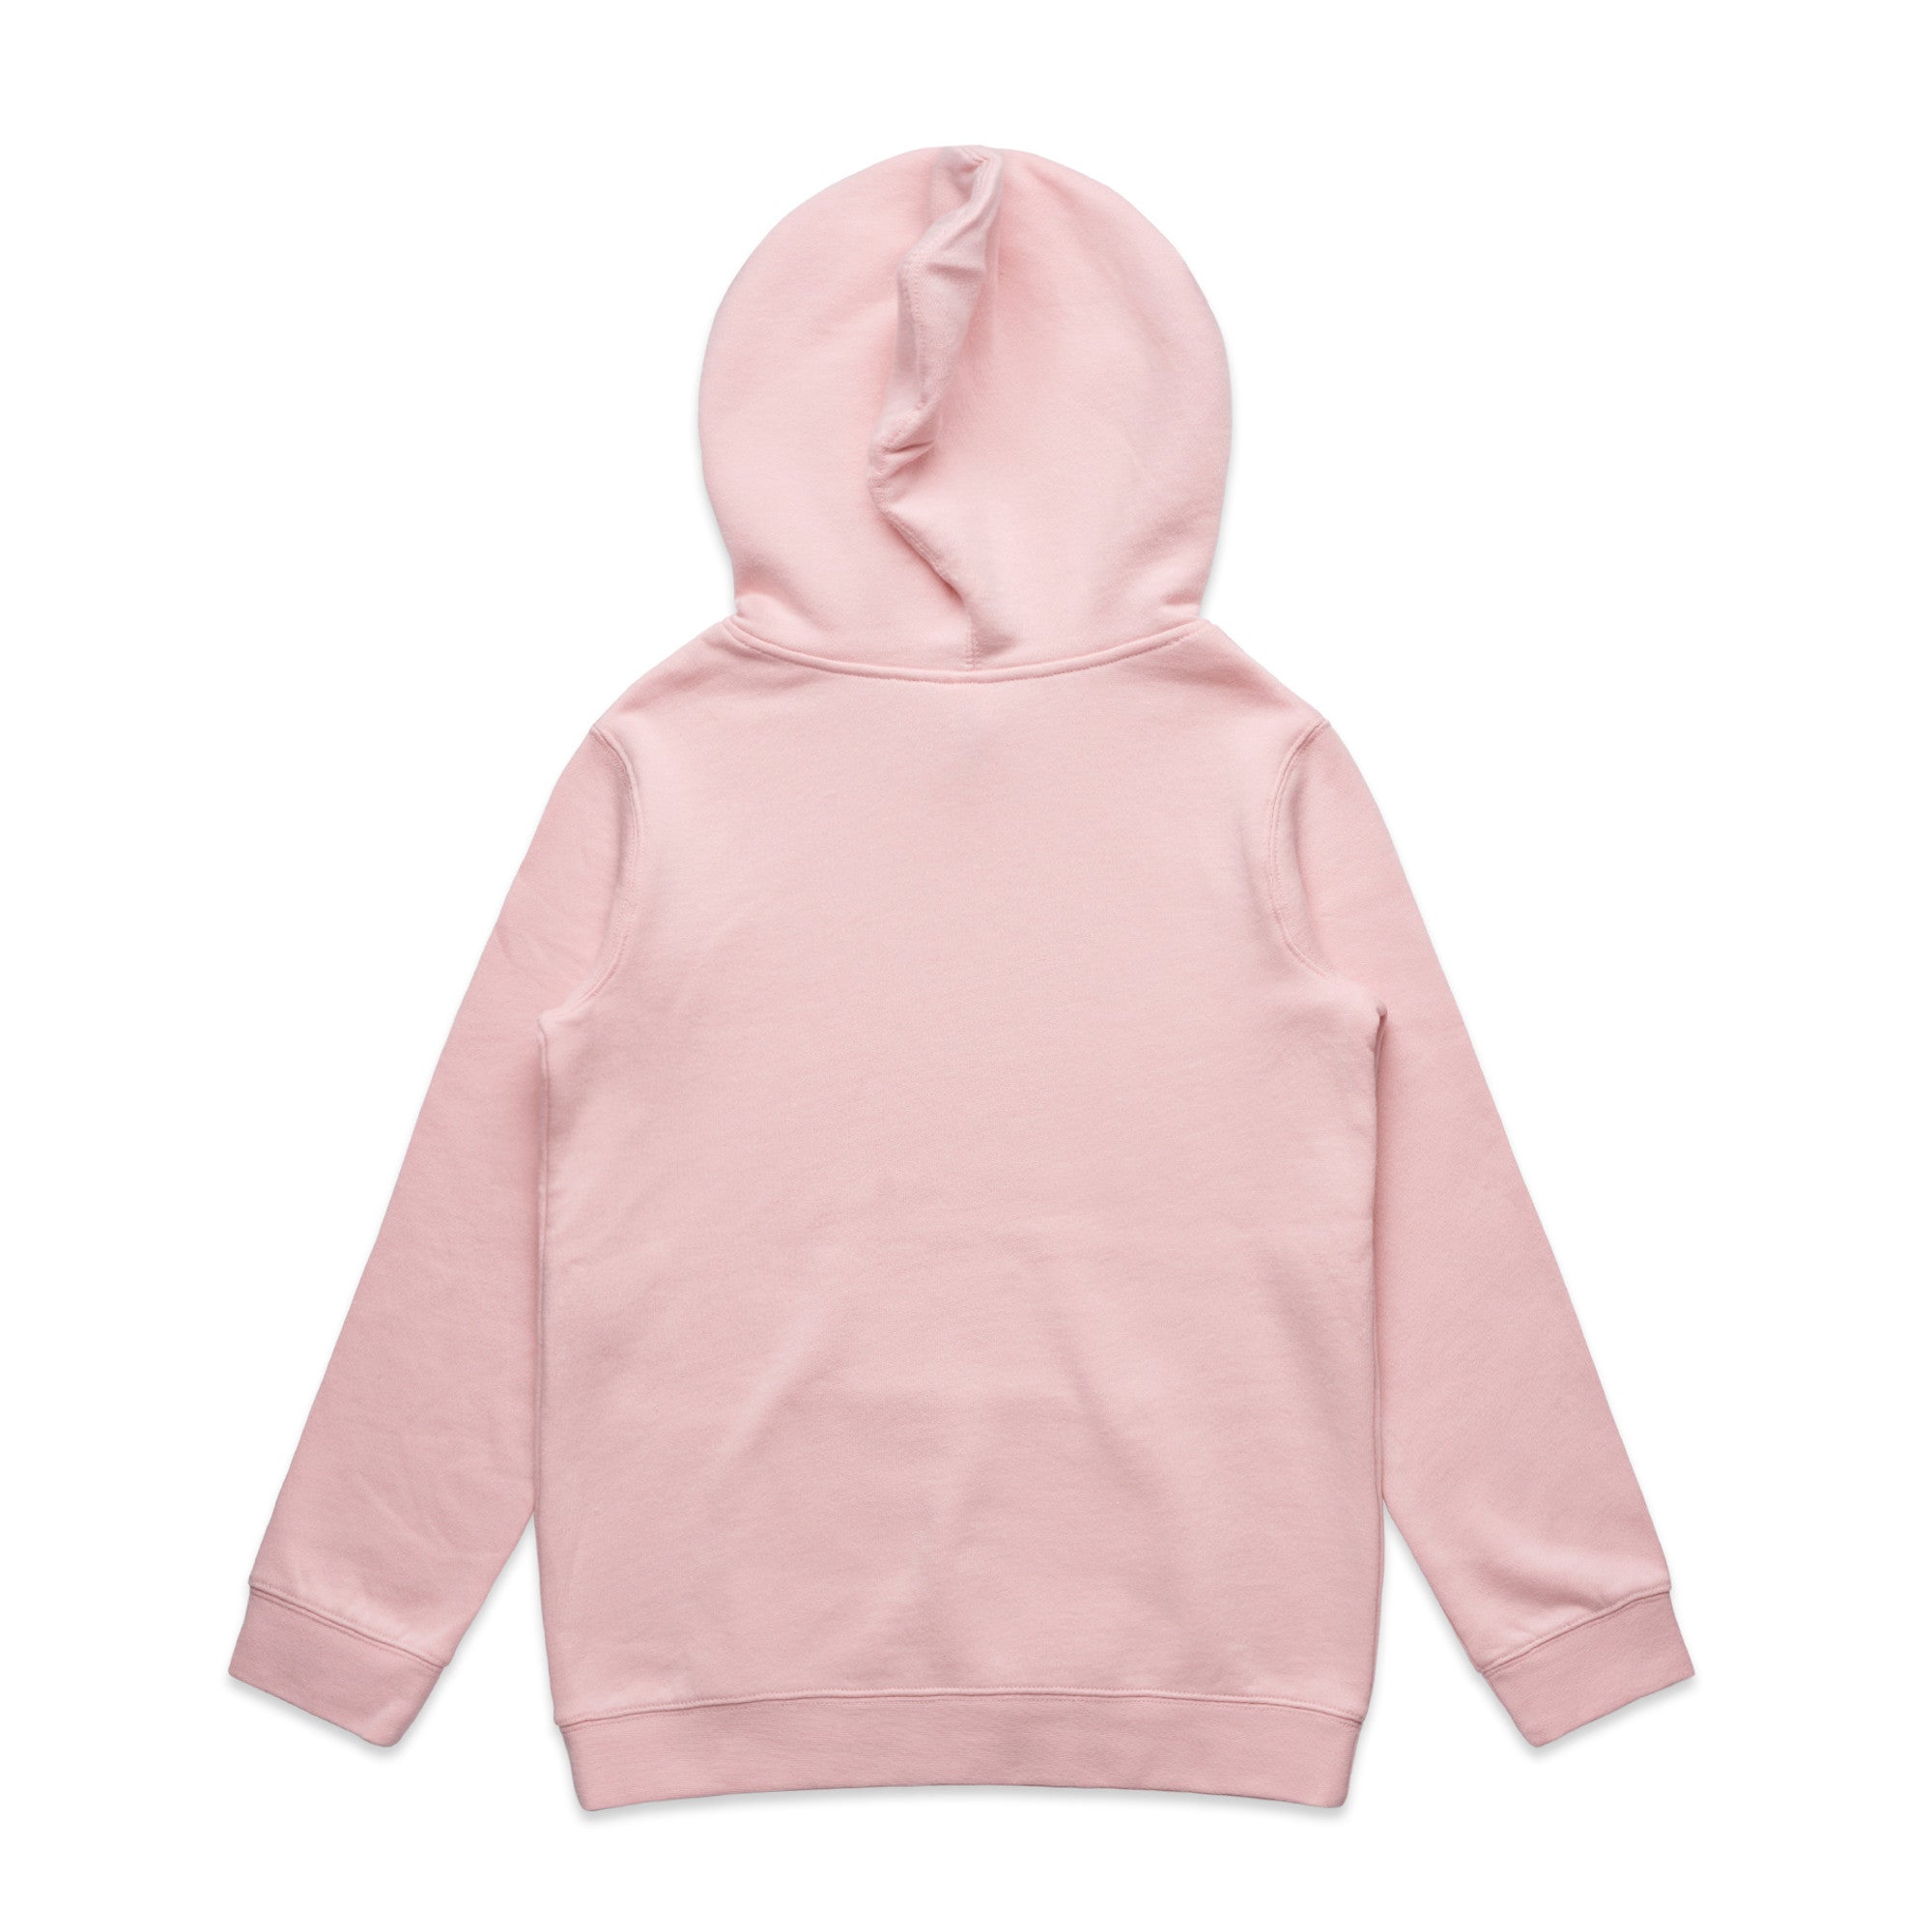 AS Colour Youth Supply Hoodie - 3033